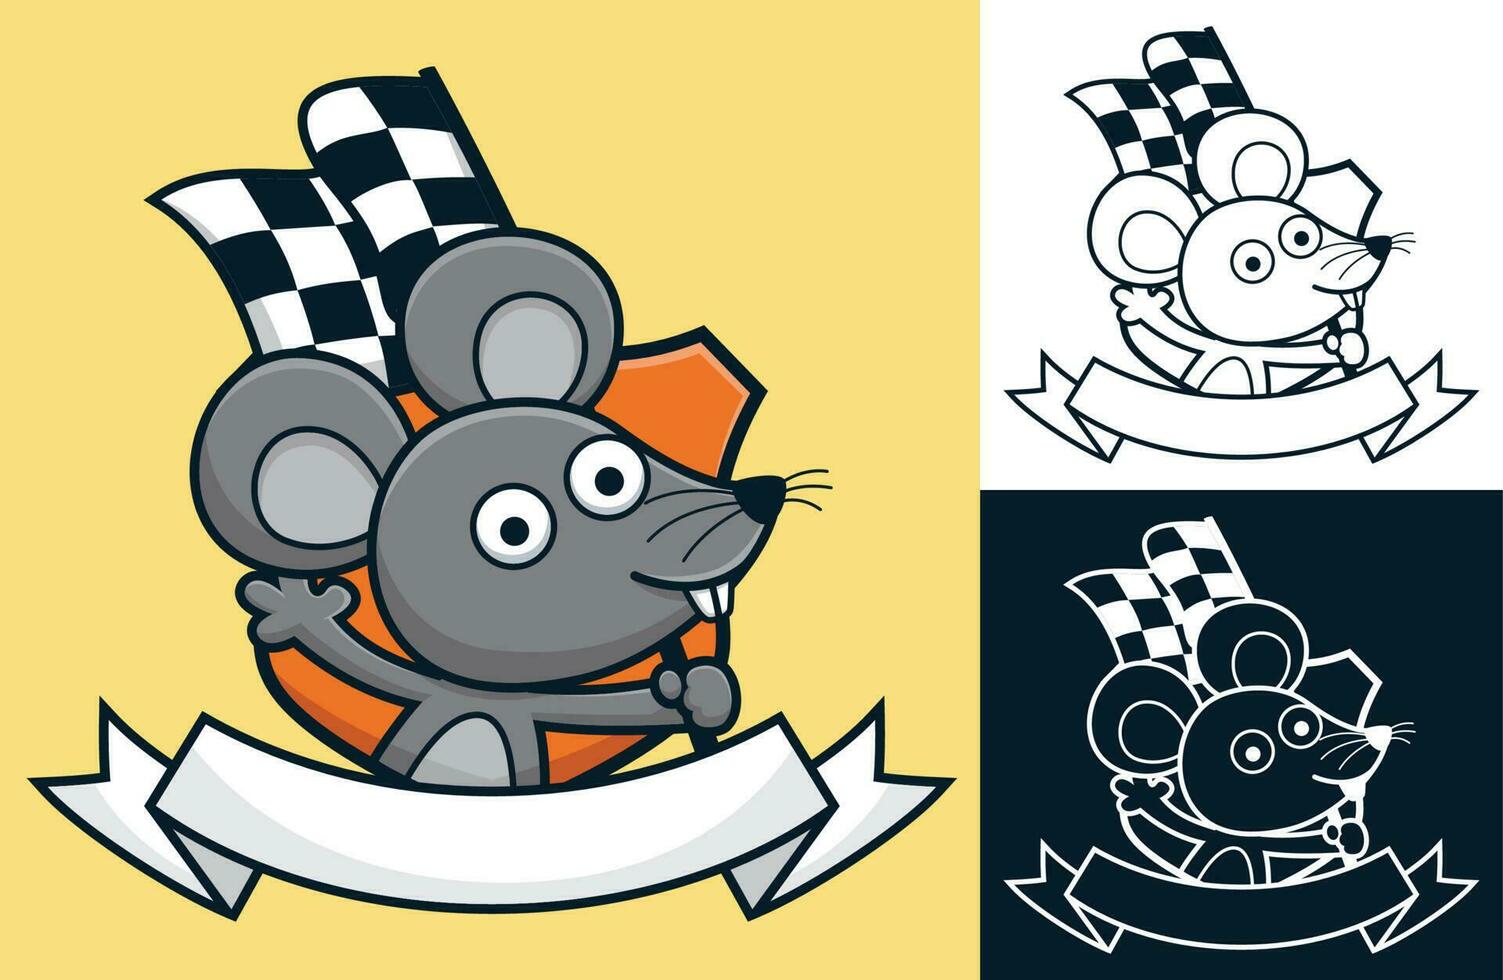 Funny mouse holding checkered flag with ribbon logo decoration. Vector cartoon illustration in flat icon style